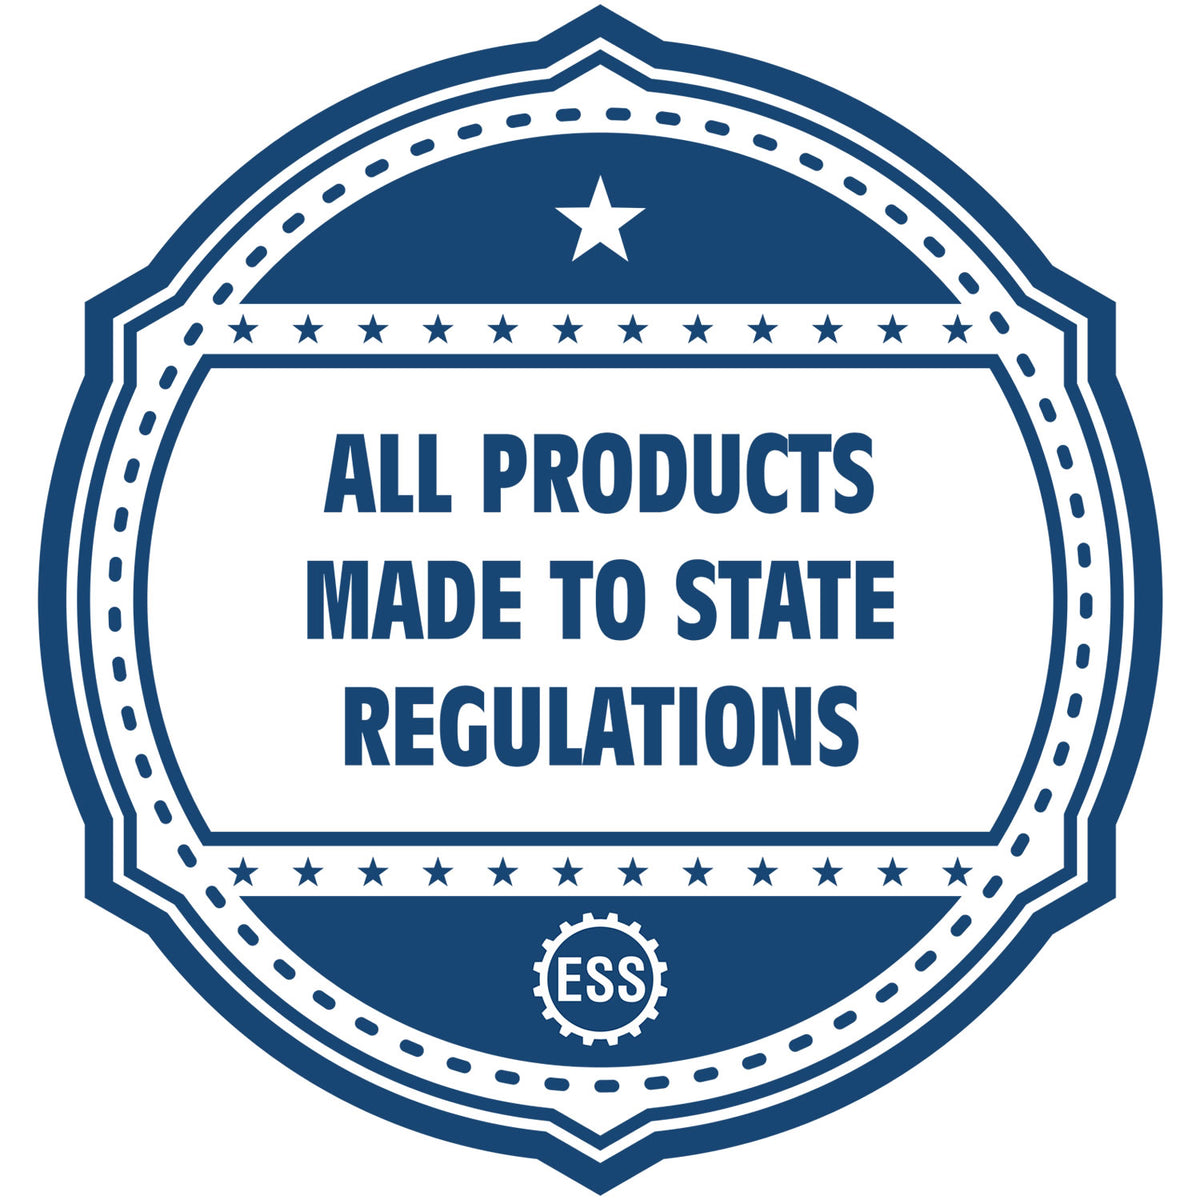 An icon or badge element for the Massachusetts Desk Surveyor Seal Embosser showing that this product is made in compliance with state regulations.